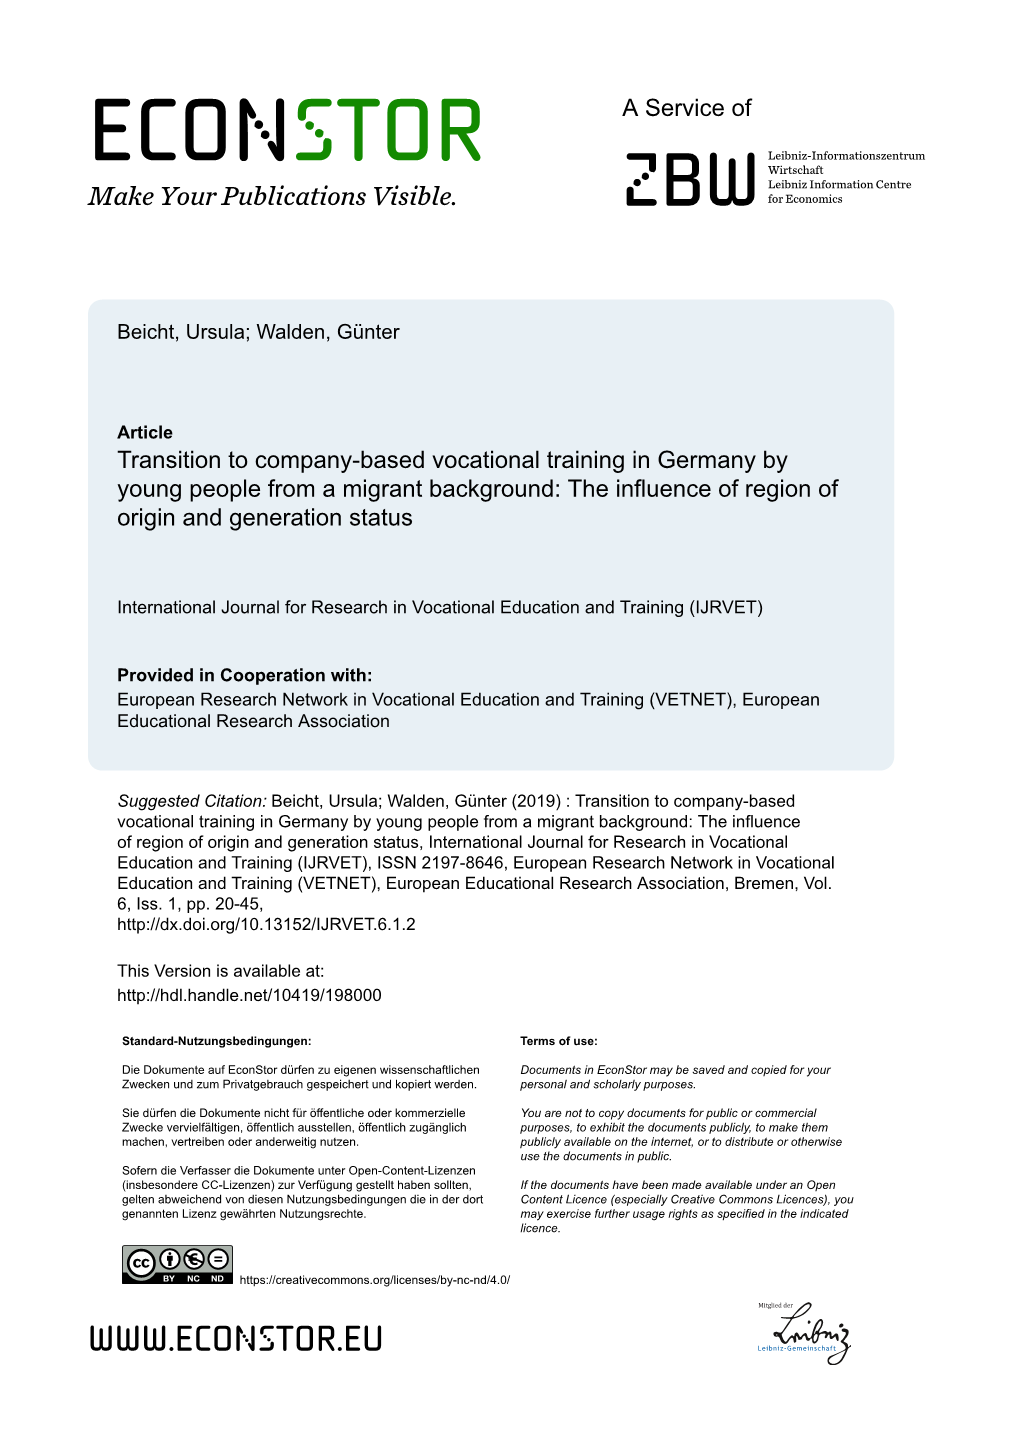 Transition to Company-Based Vocational Training in Germany by Young People from a Migrant Background: the Influence of Region of Origin and Generation Status